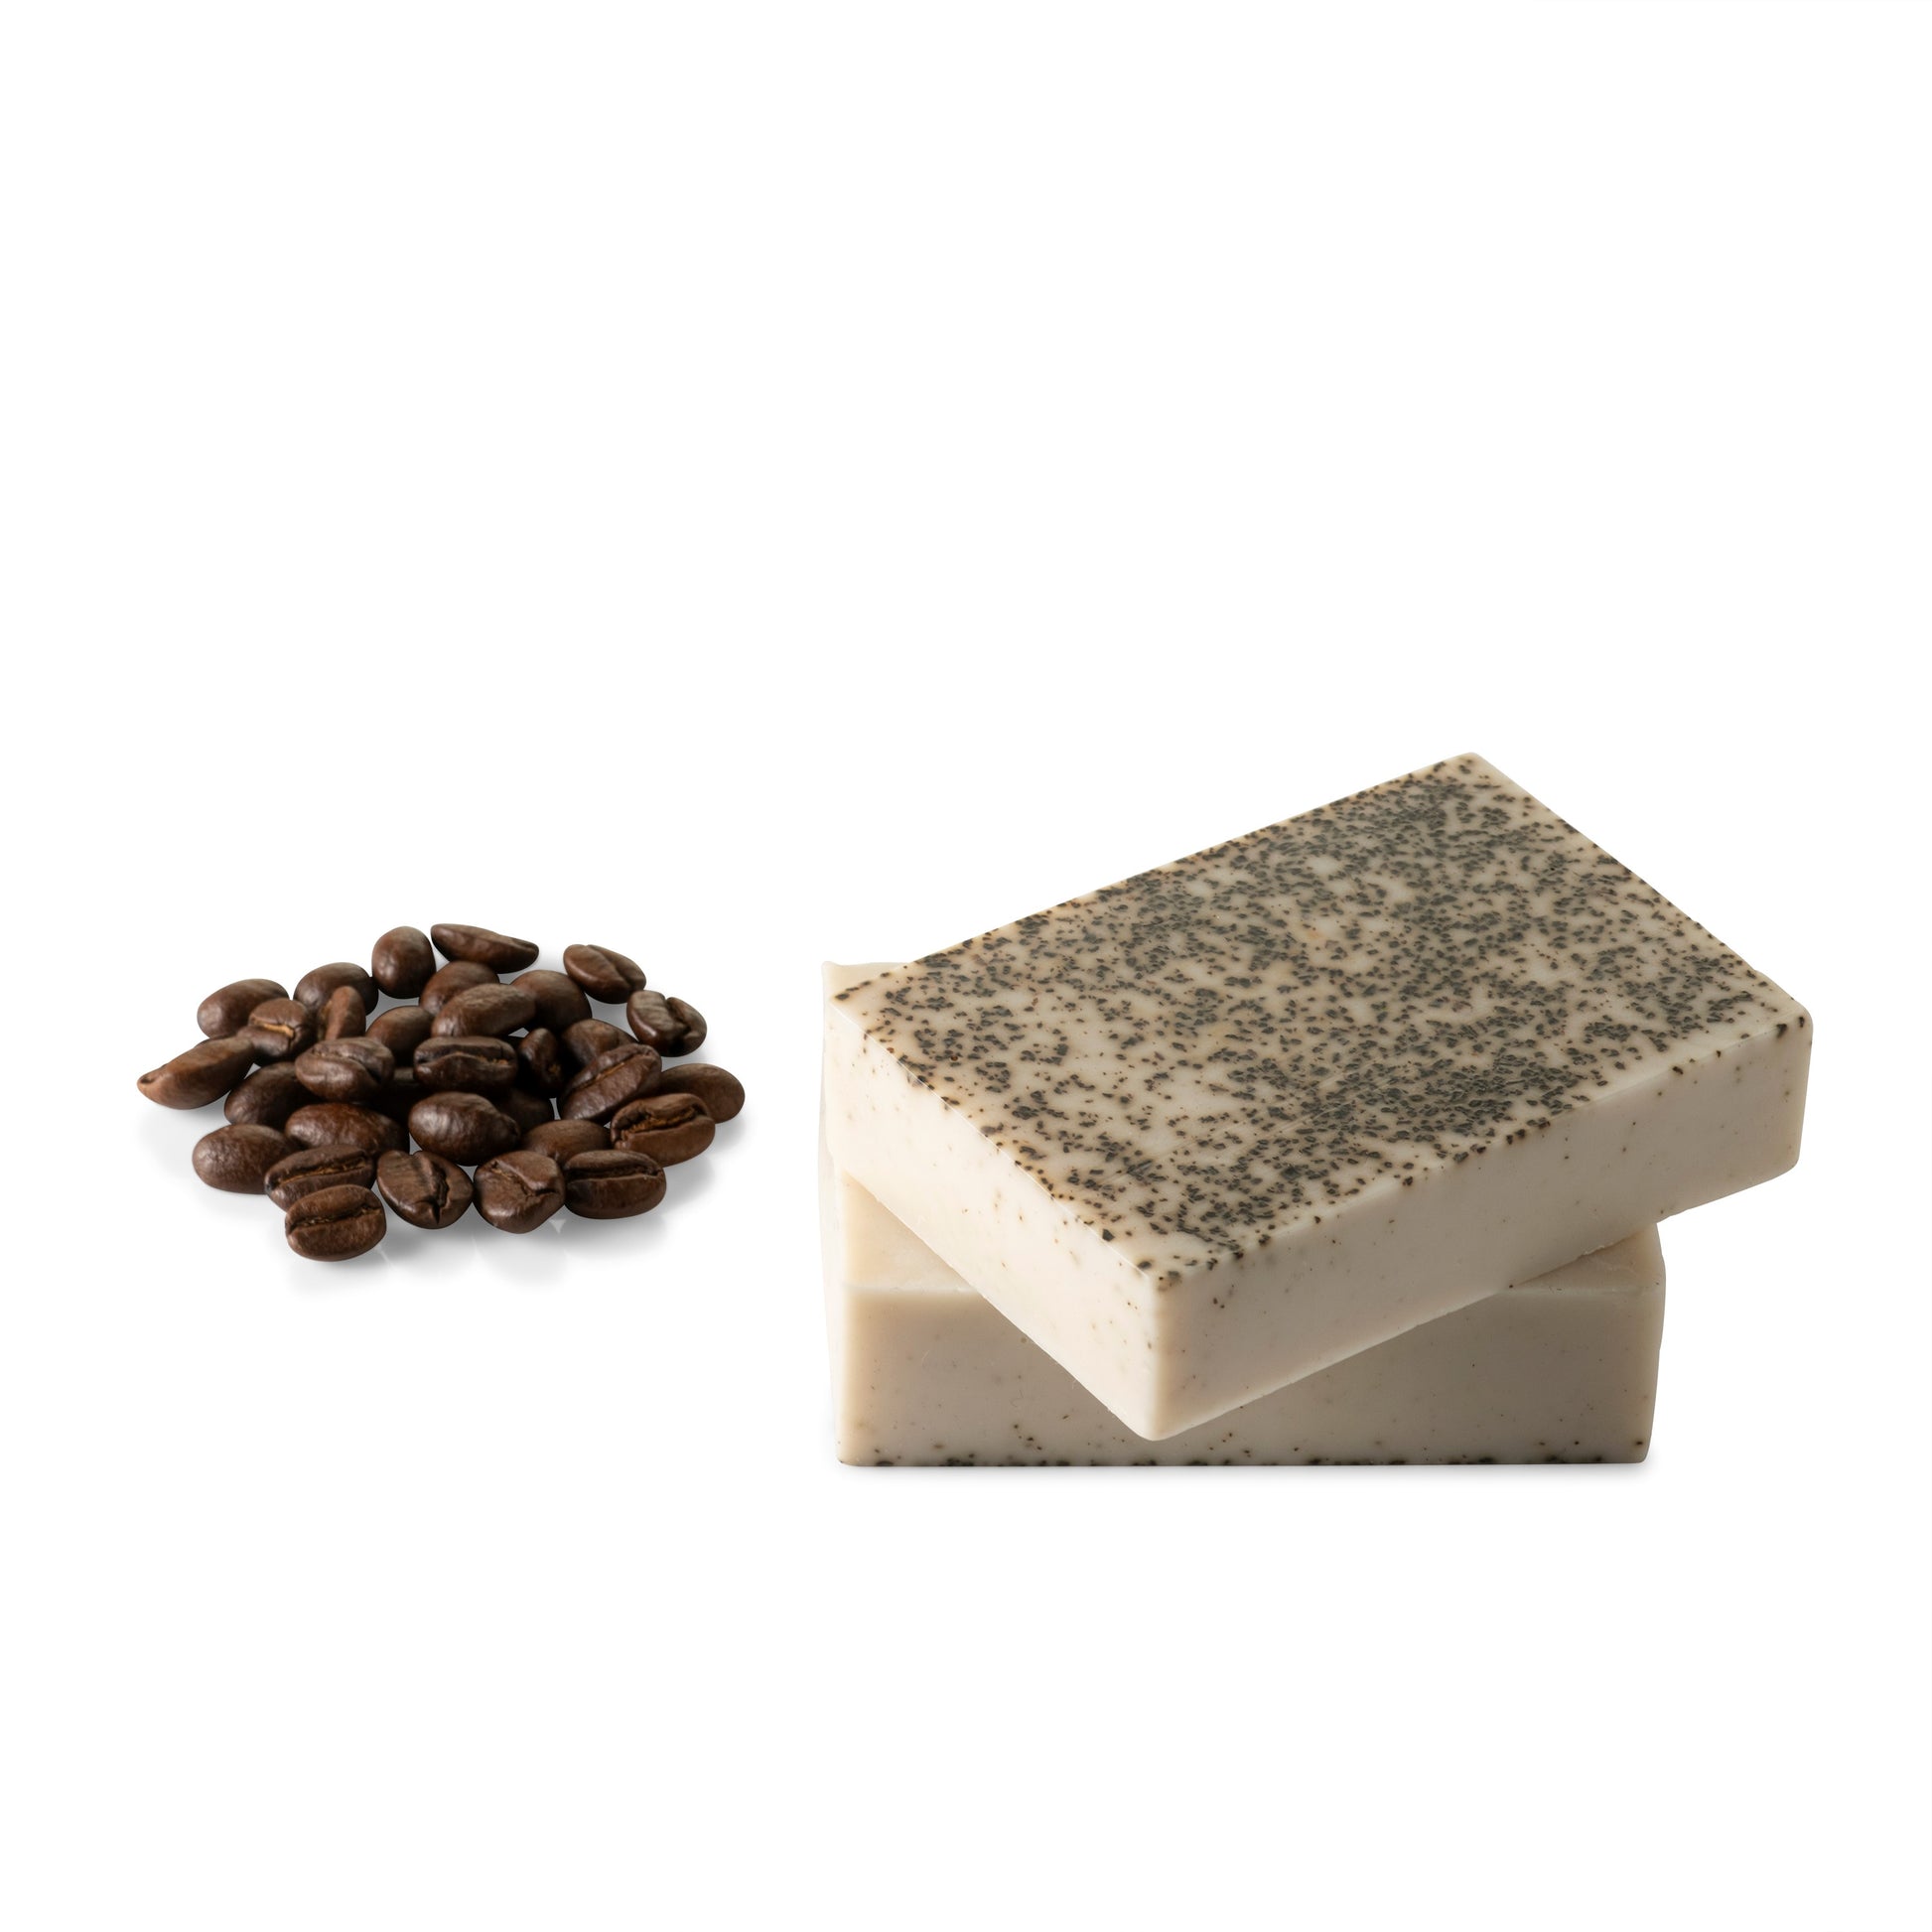 a picture of the coffee body soap next to coffee beans on a white background